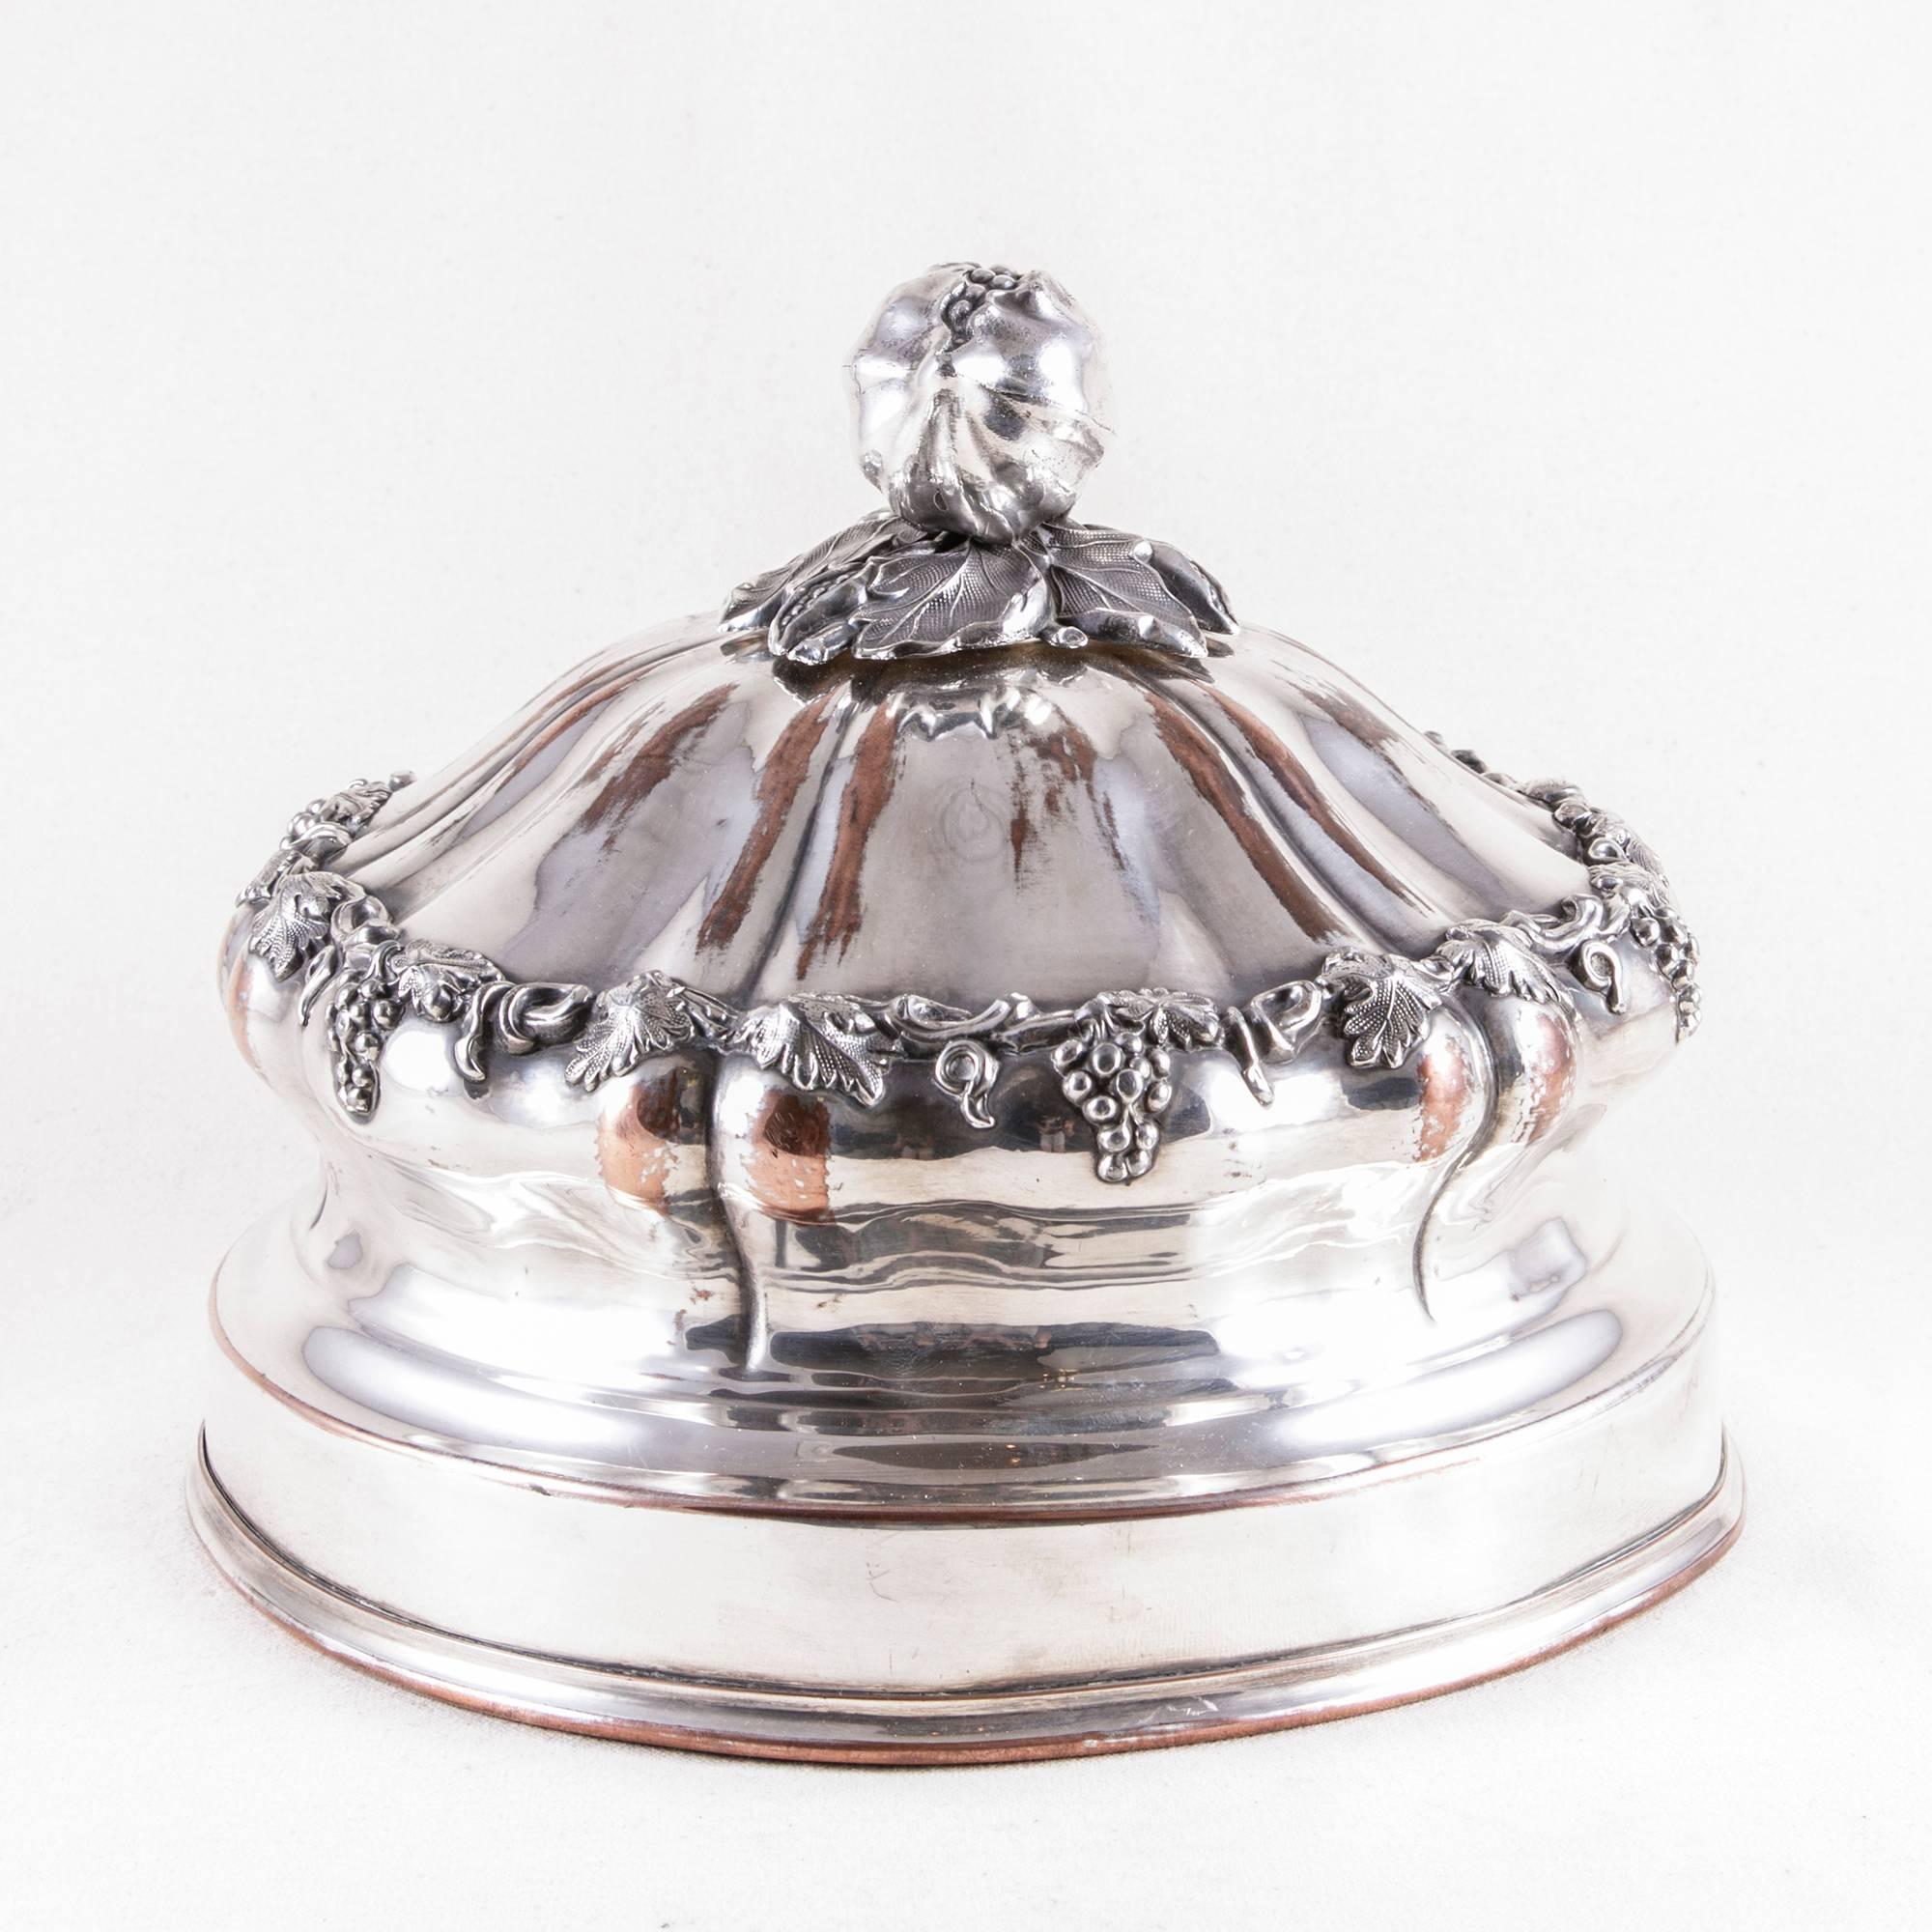 20th Century 19th Century French Silver Hotel Dome Serving Piece Food Warmer Dish Cover